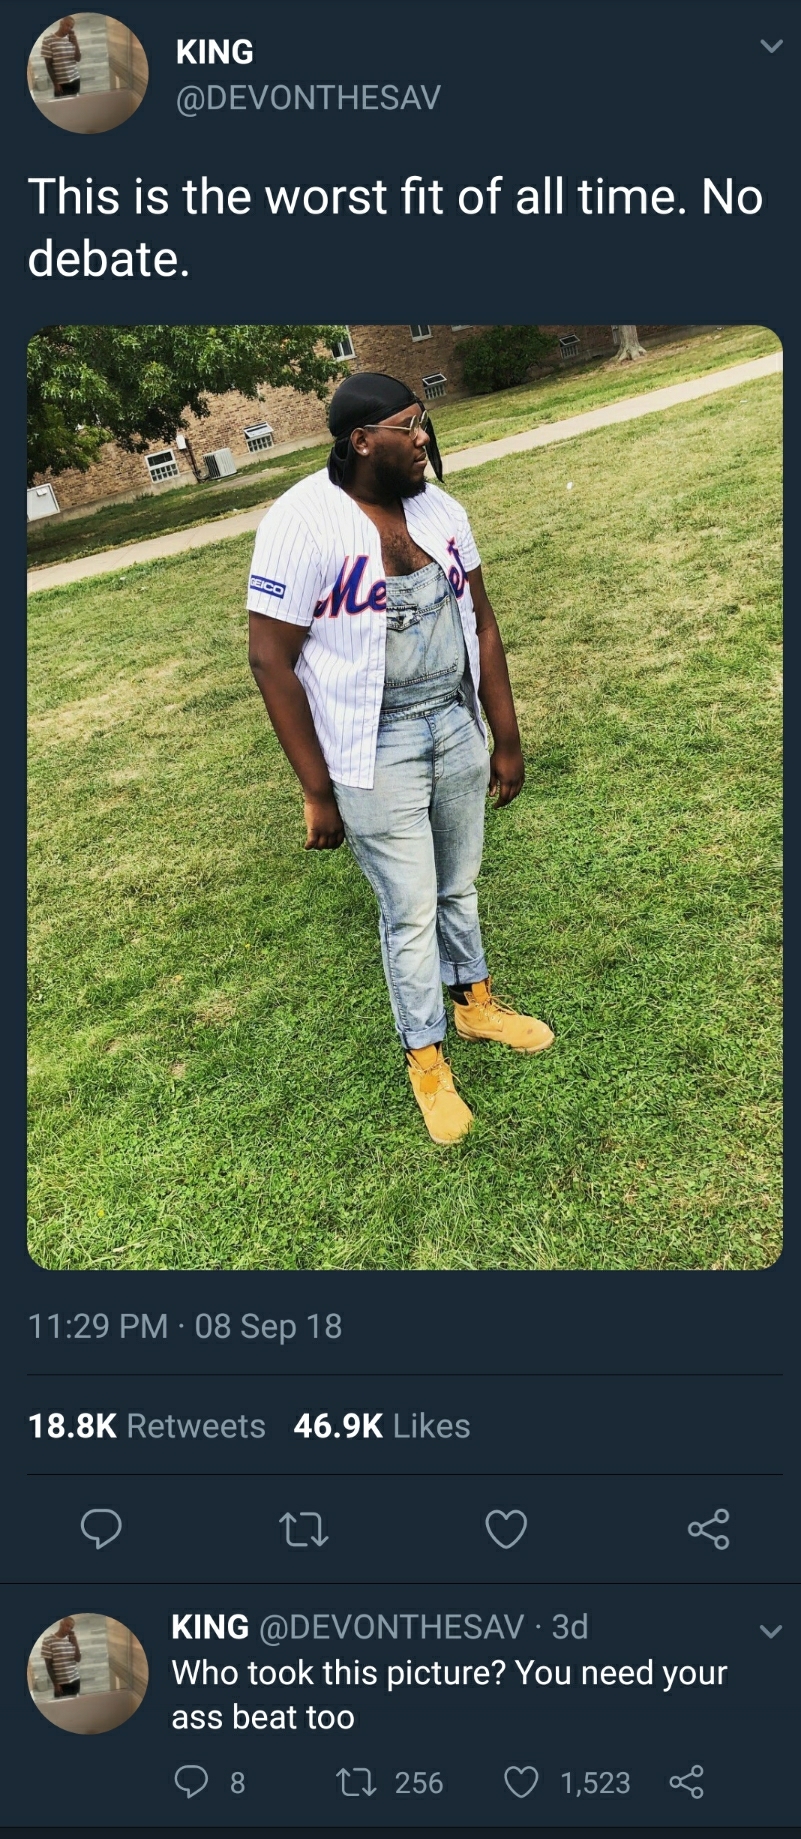 memes - Internet meme - King This is the worst fit of all time. No debate. 08 Sep 18 King Devonthesav 3d Who took this picture? You need your ass beat too Os 256 1522